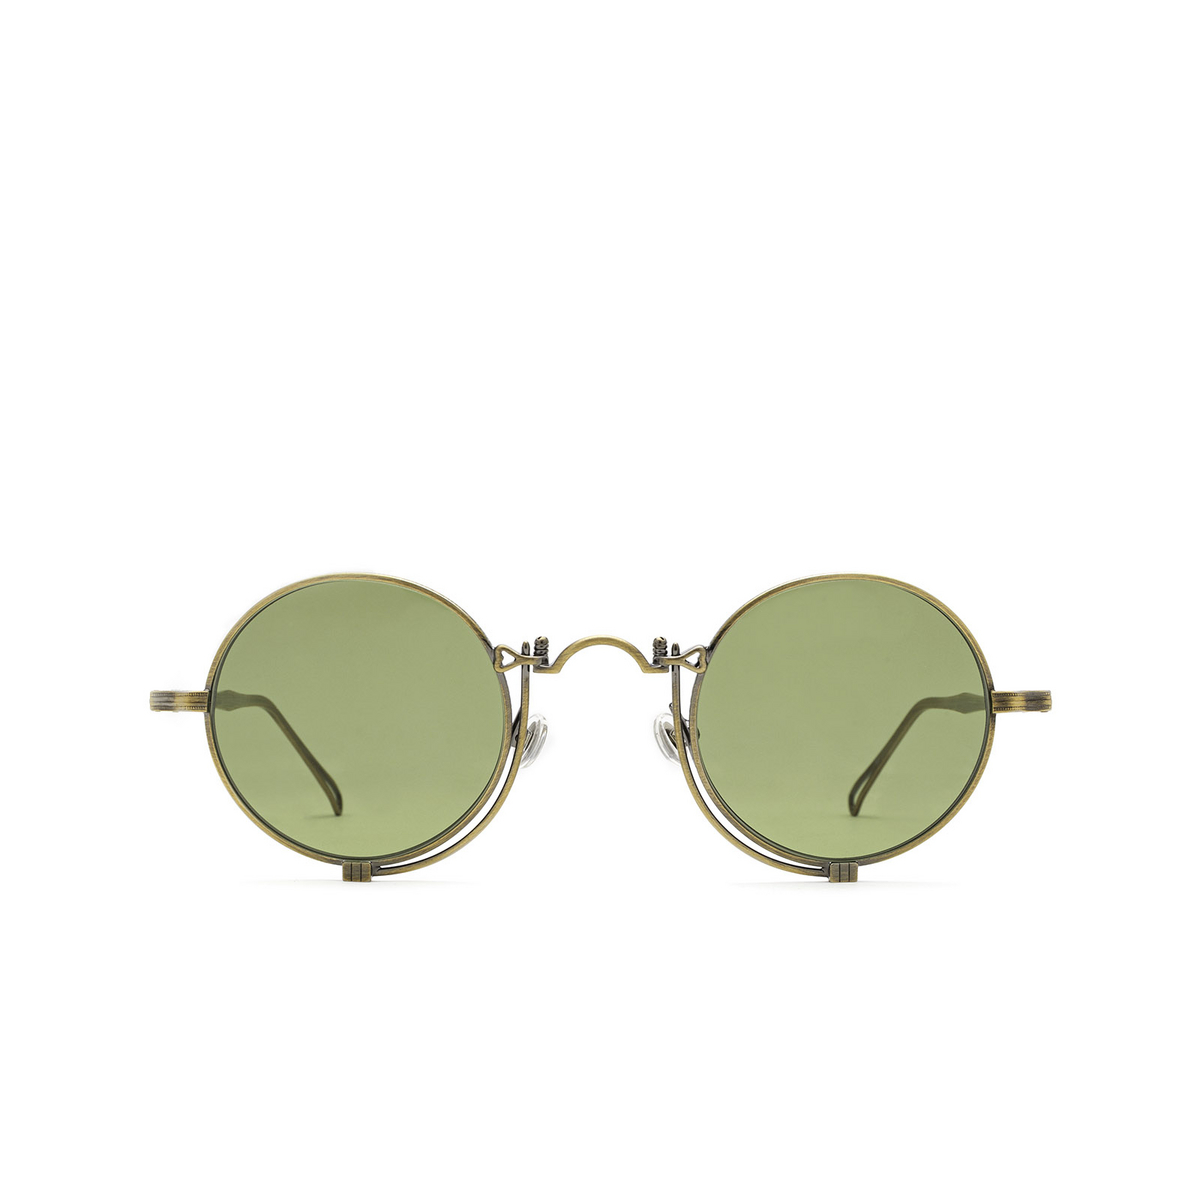 Matsuda® Round Sunglasses: 10601H color Antique Gold Ag - front view.